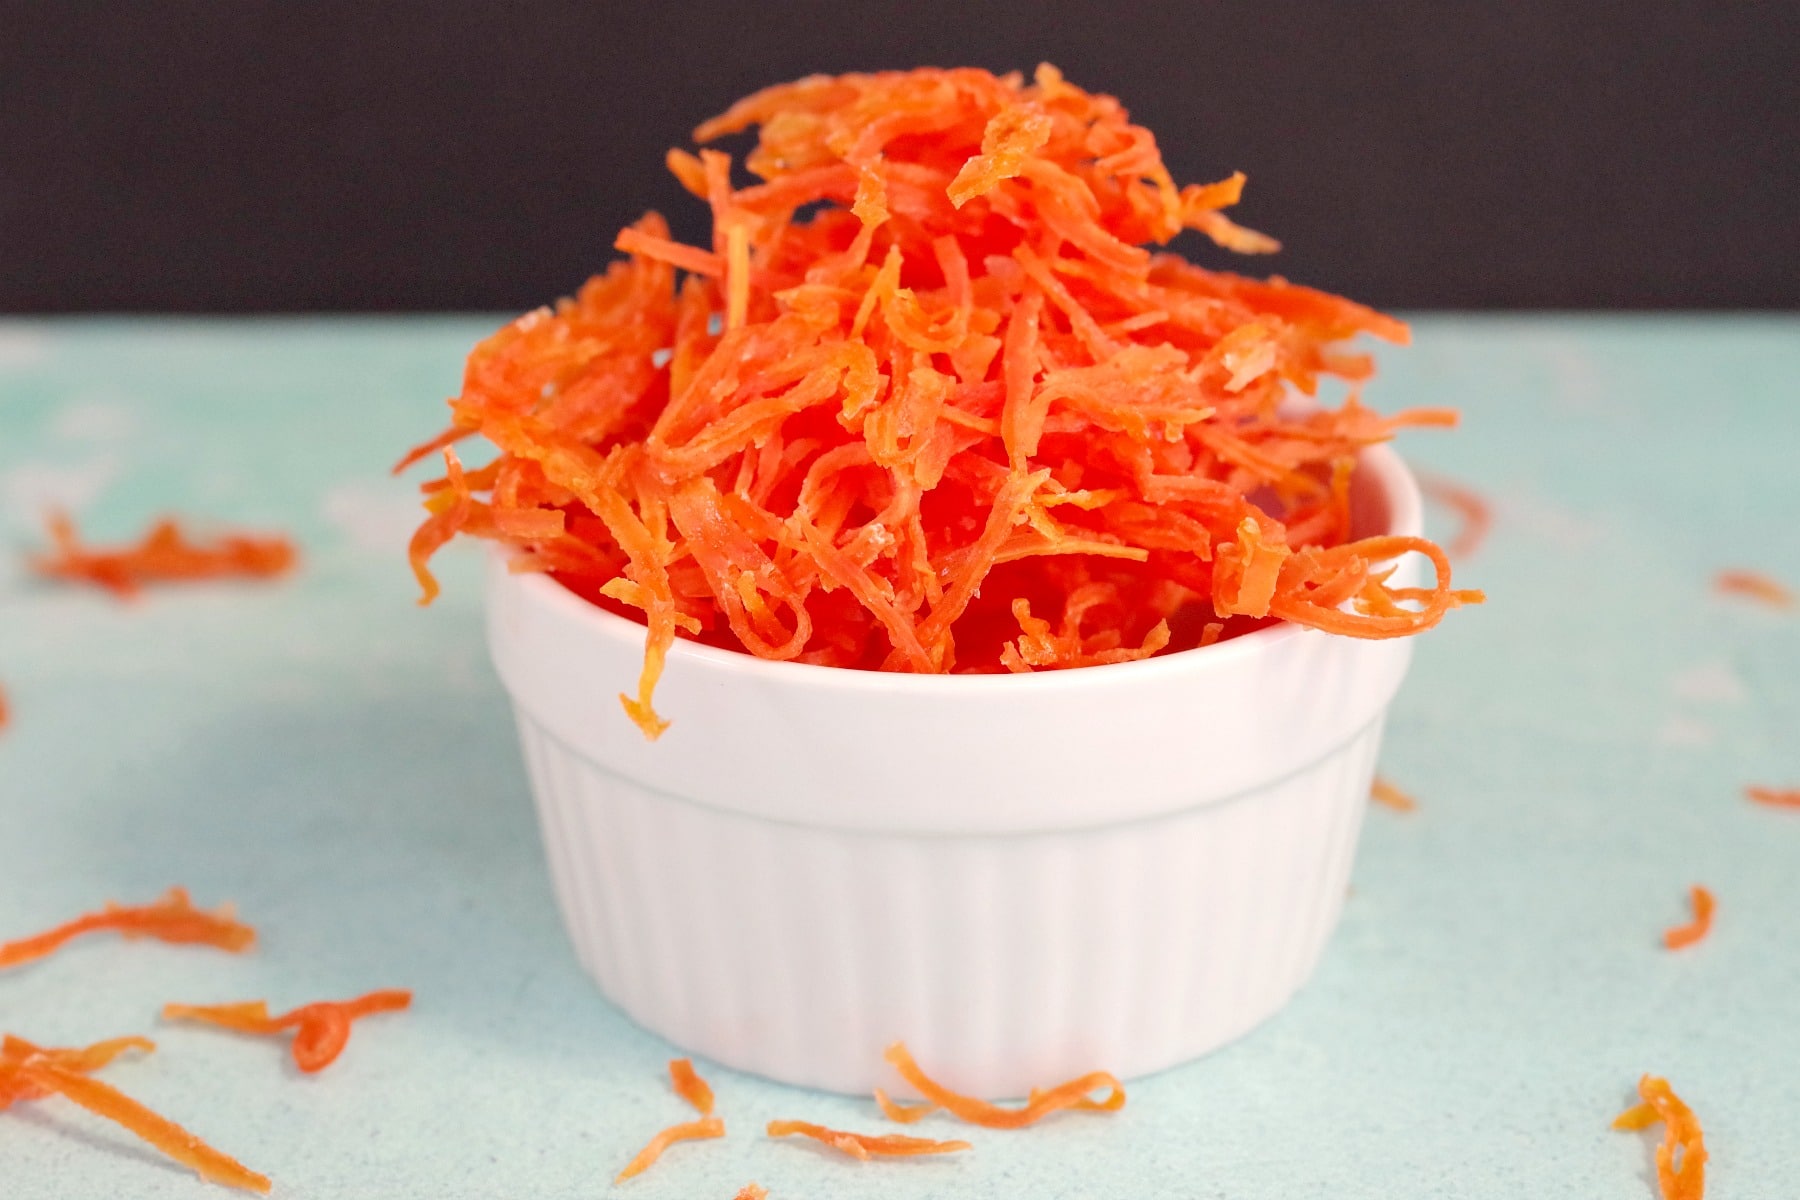 Candied carrots in a small white dish 